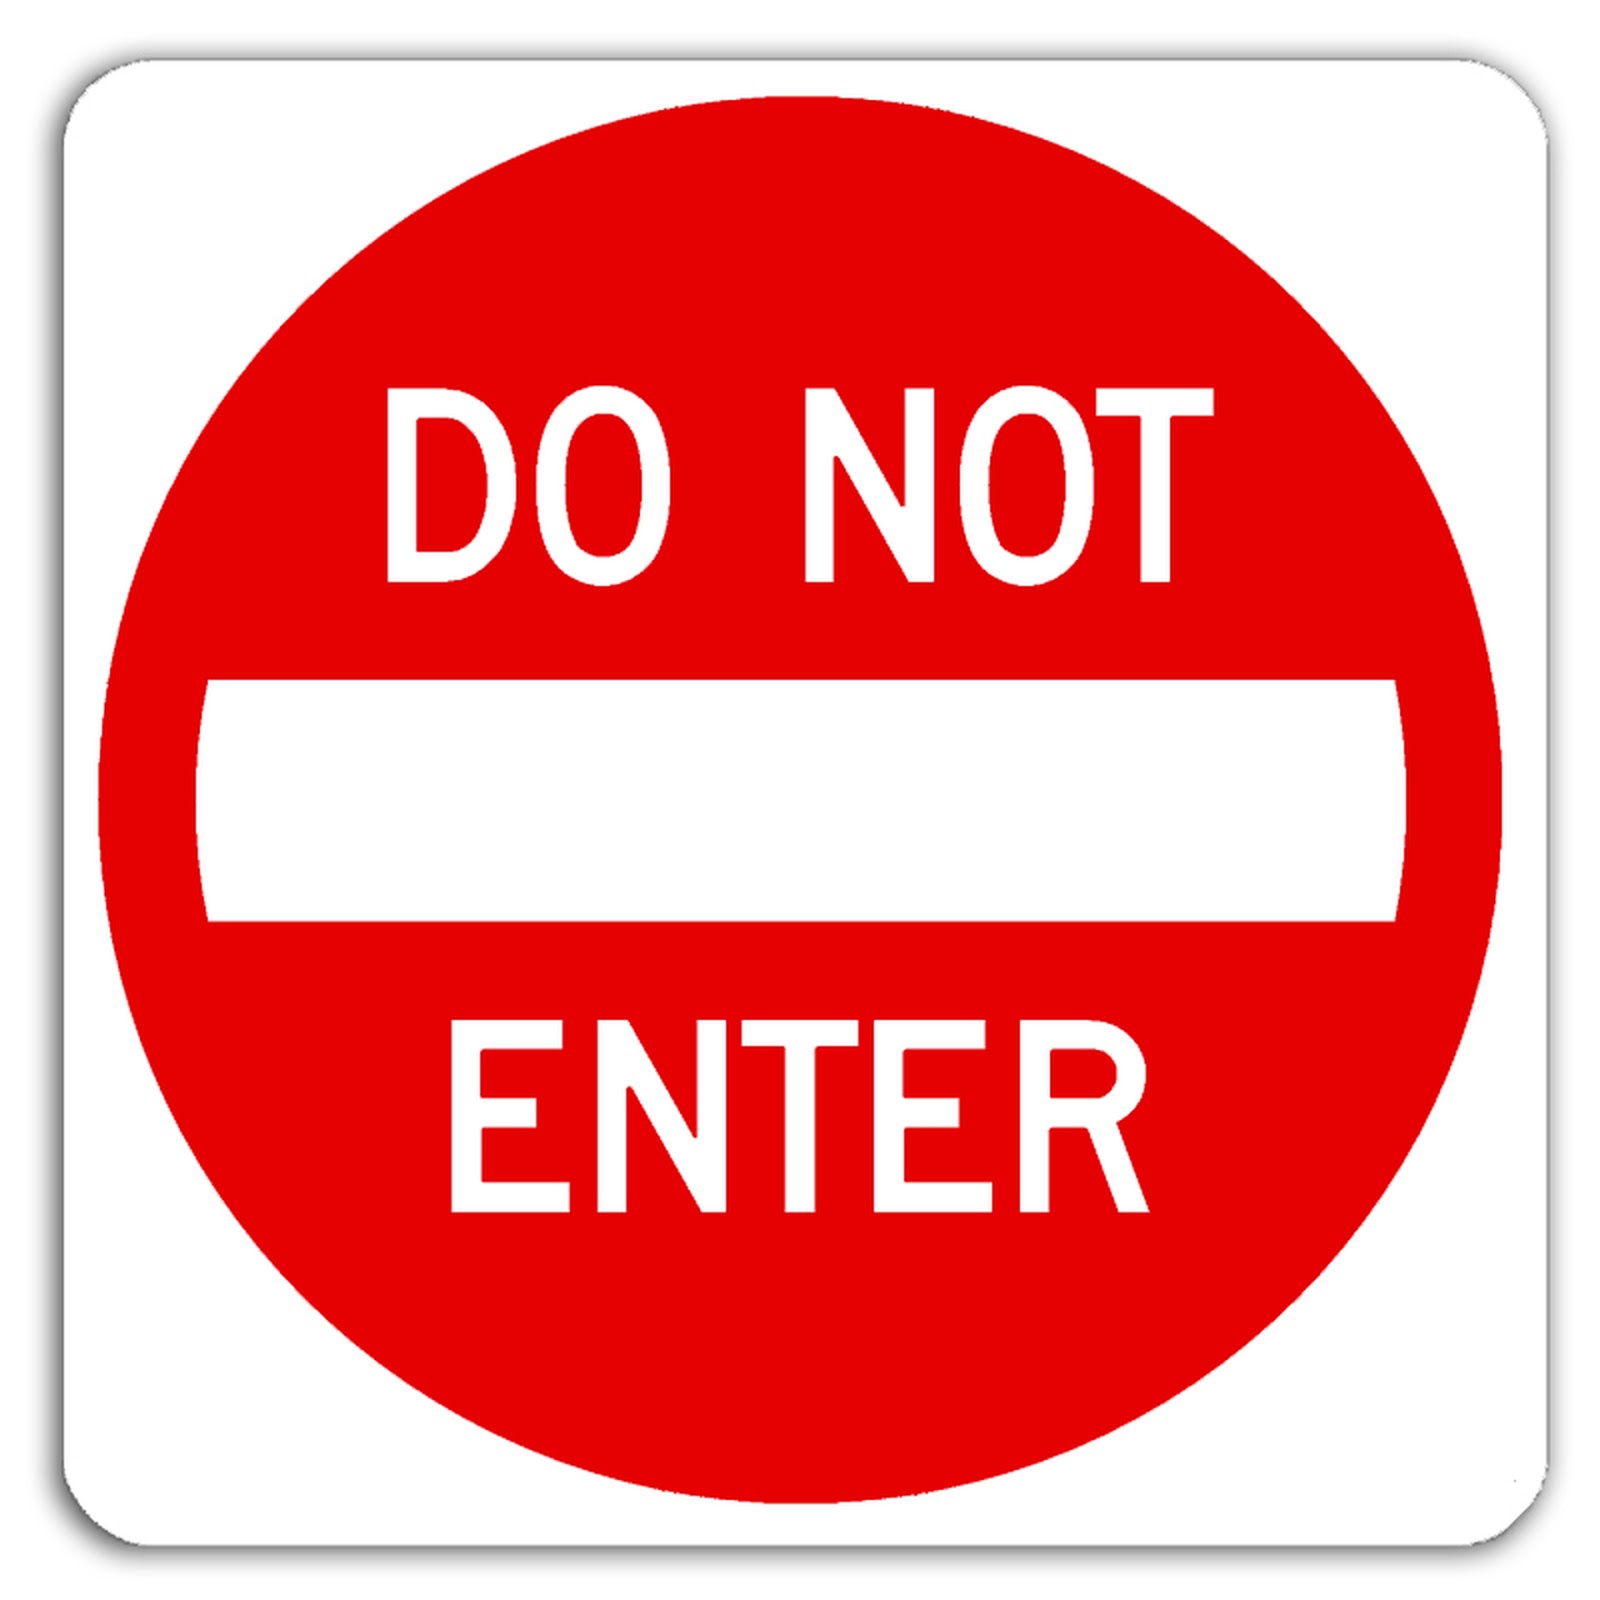 Do Not Enter Sign Meaning